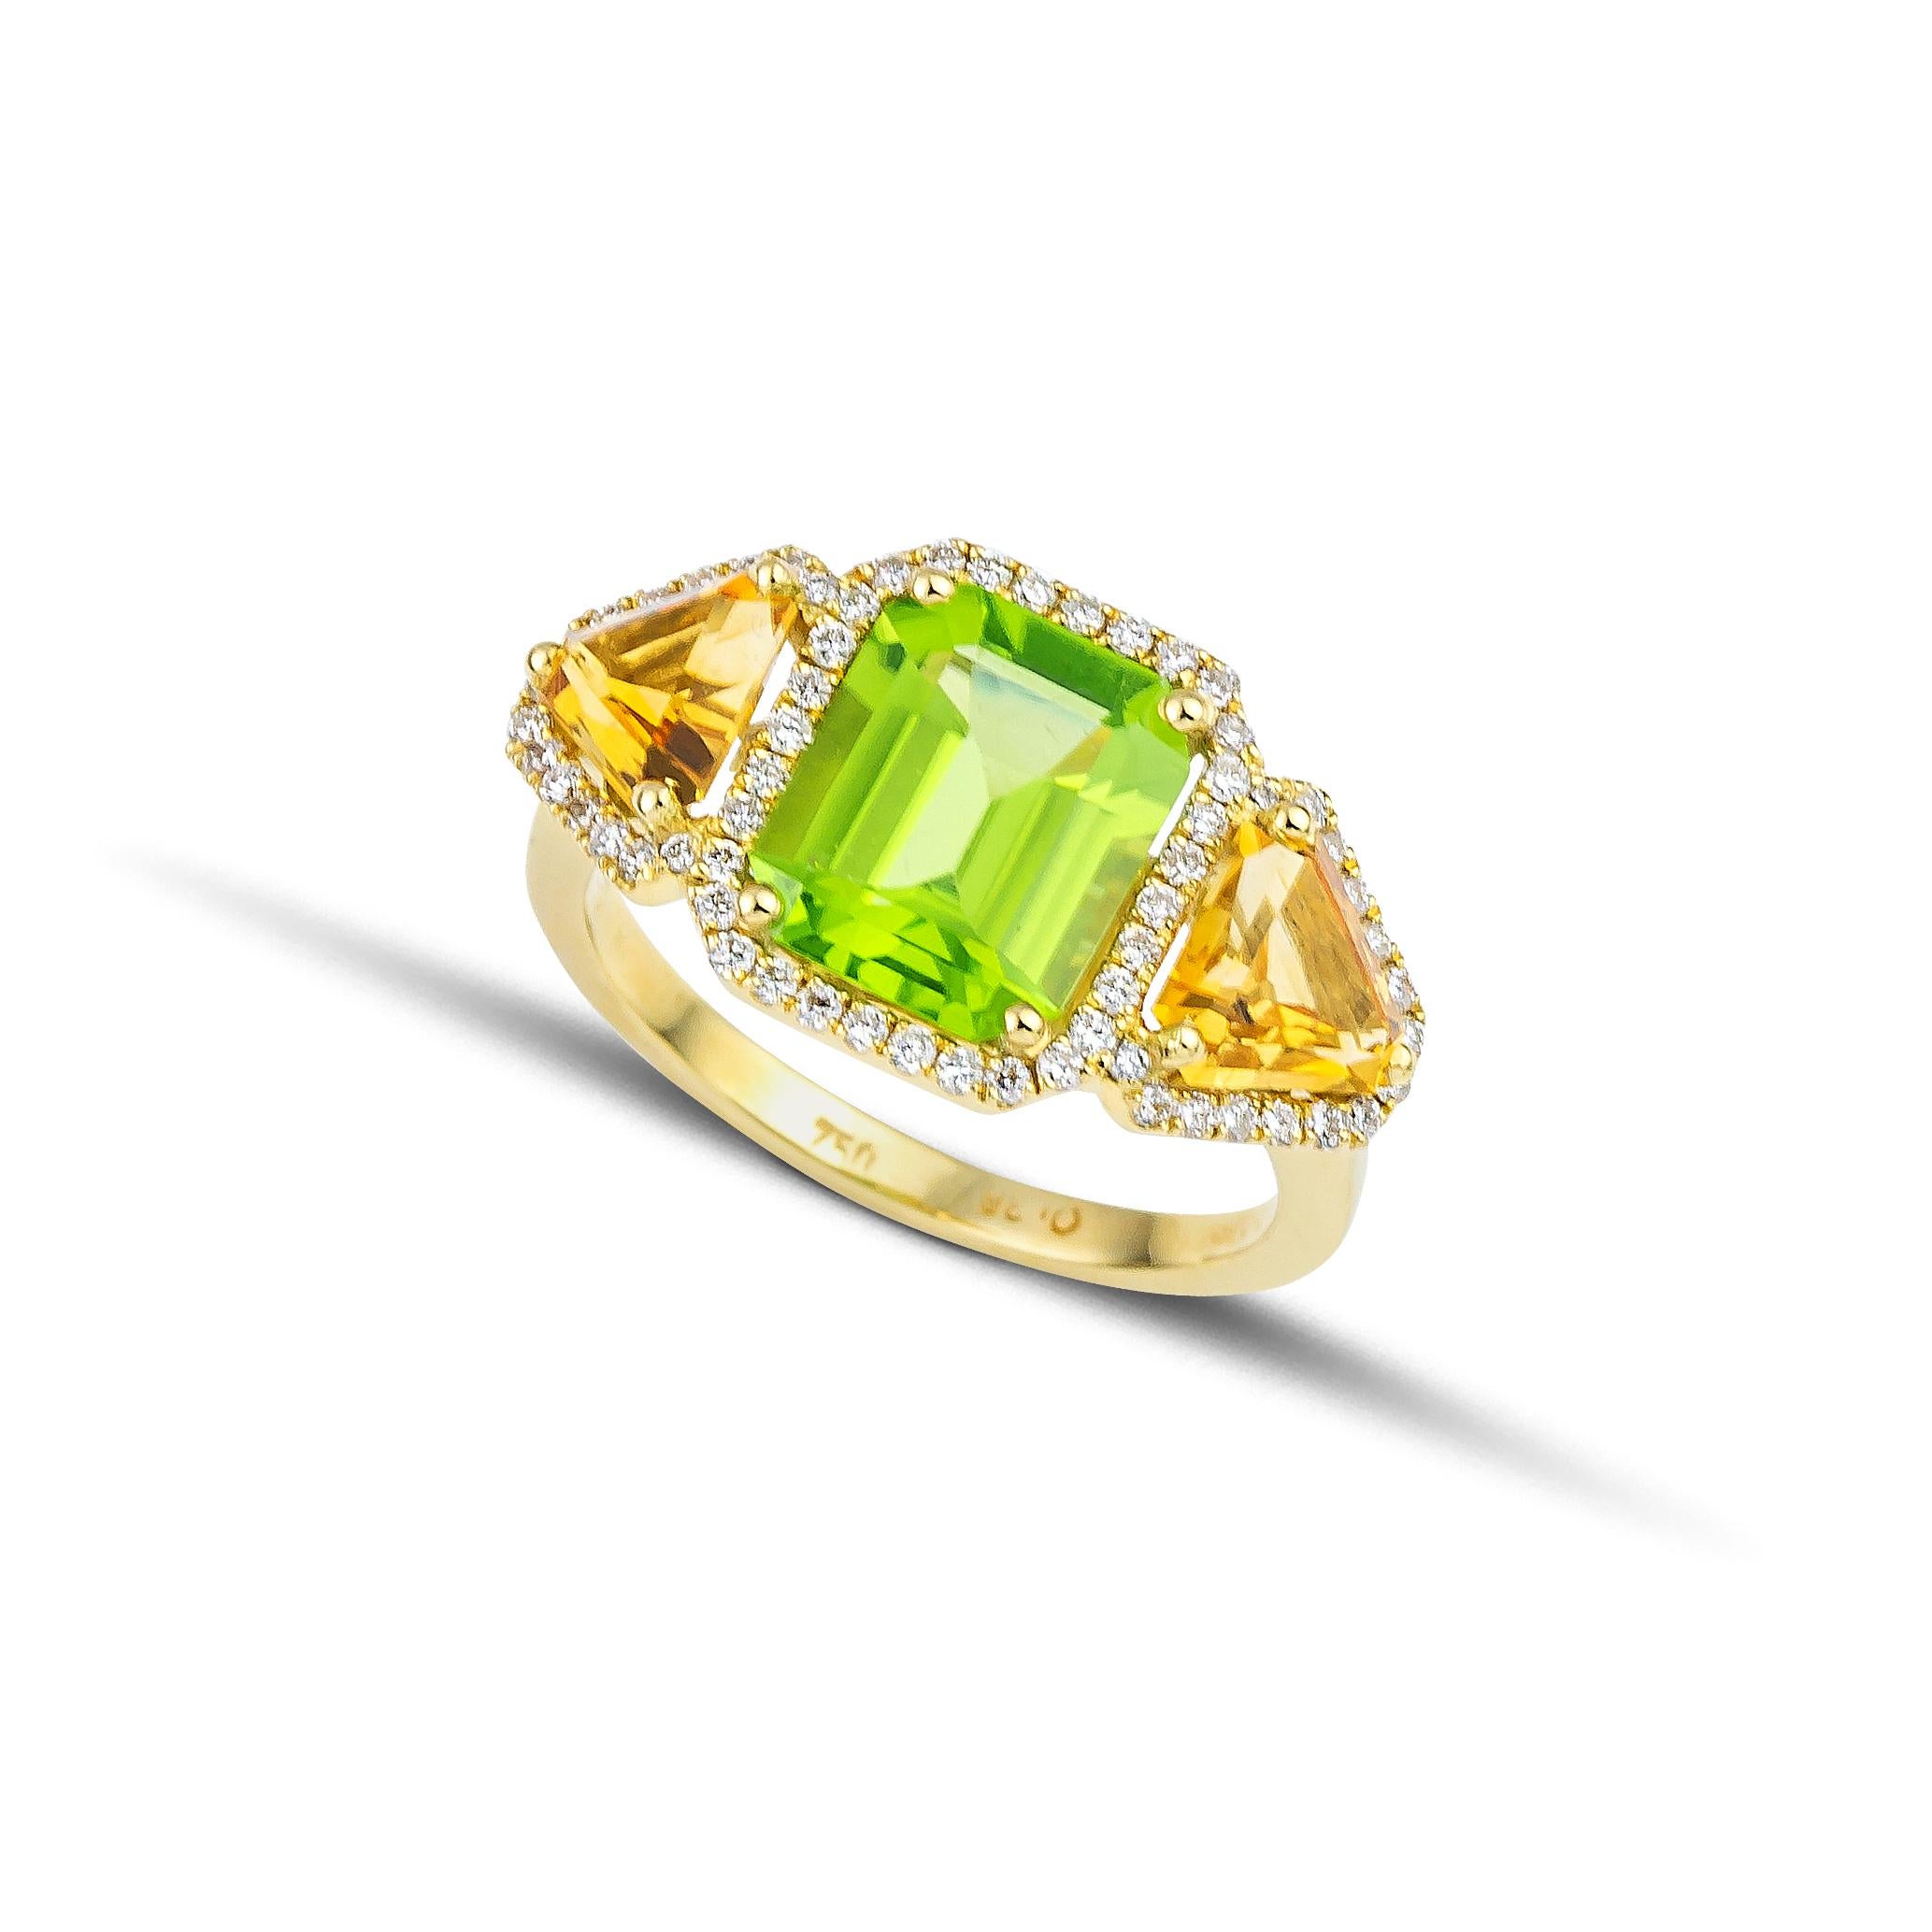 Three stones ring made of 18Kt yellow gold with center emerald cut green peridot and two trillion citrines elegantly framed by brilliant cut diamonds. The peridot is carefully set among four gold prongs and the citrines are set among three gold